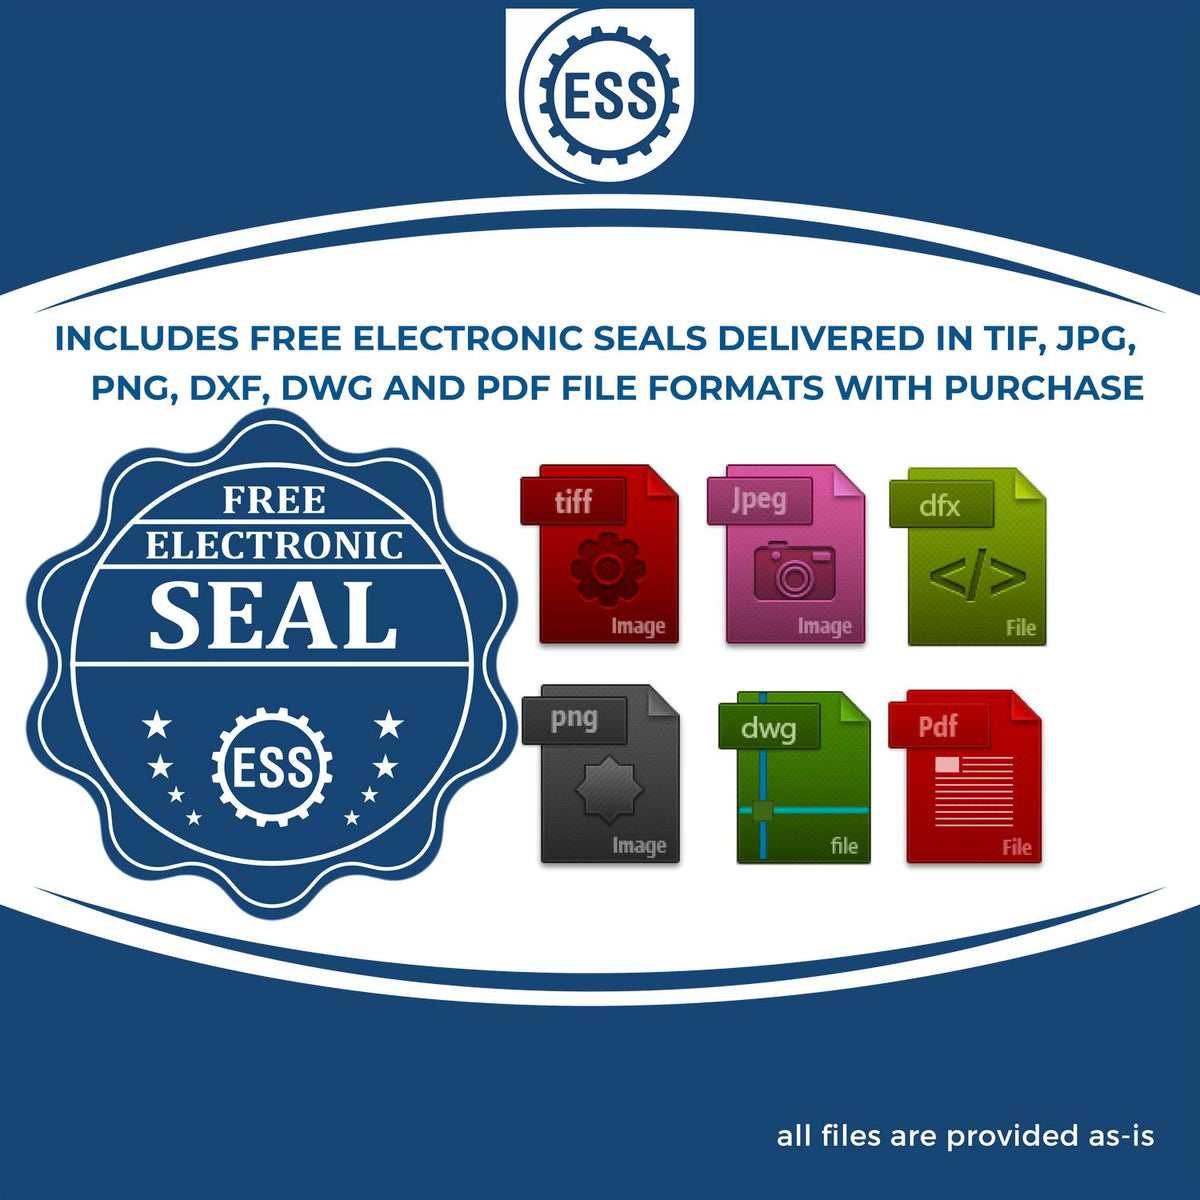 An infographic for the free electronic seal for the Premium MaxLight Pre-Inked Mississippi Landscape Architectural Stamp illustrating the different file type icons such as DXF, DWG, TIF, JPG and PNG.